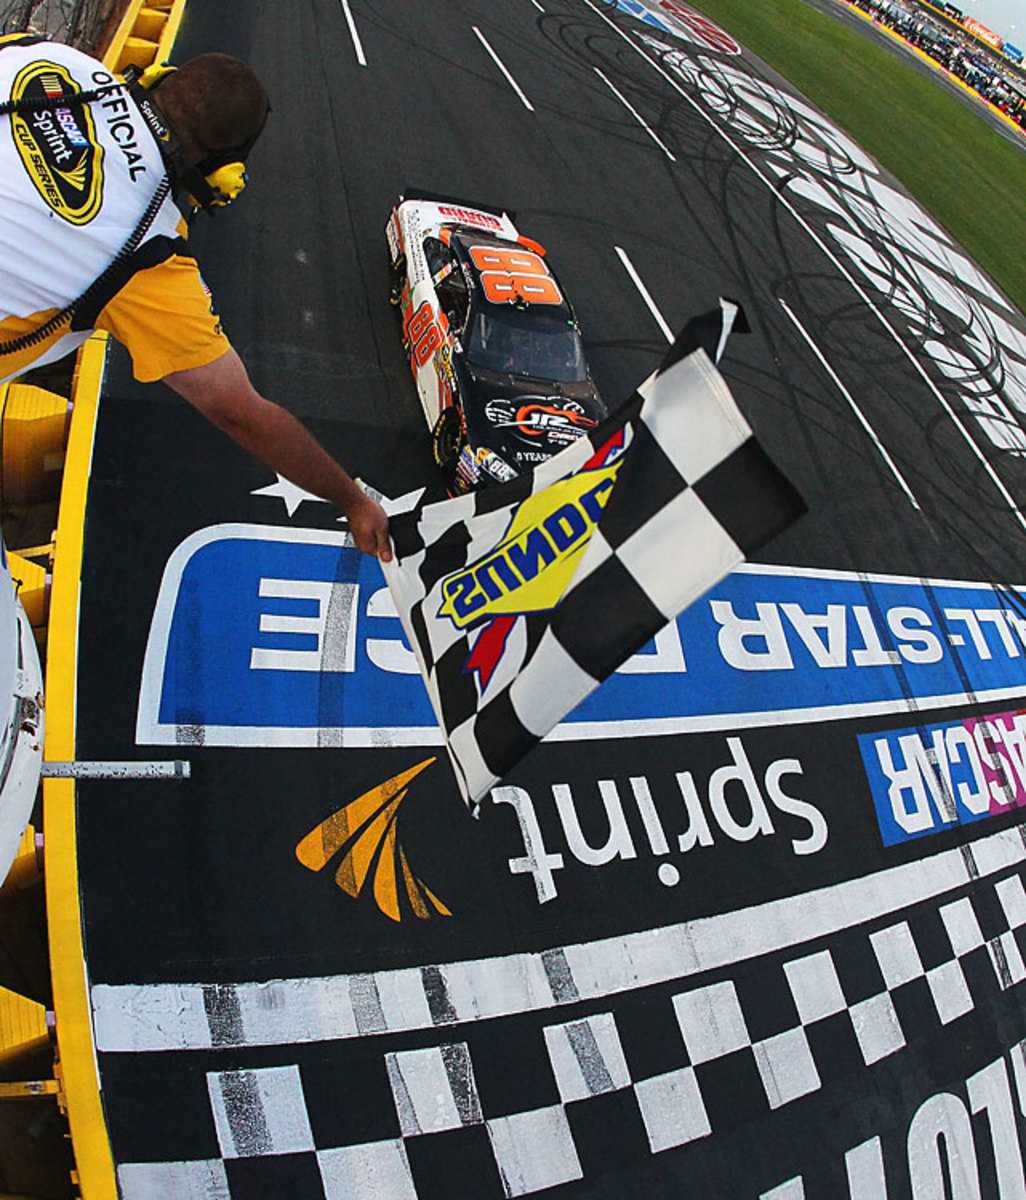 2012 NASCAR Sprint Cup Winners - Sports Illustrated